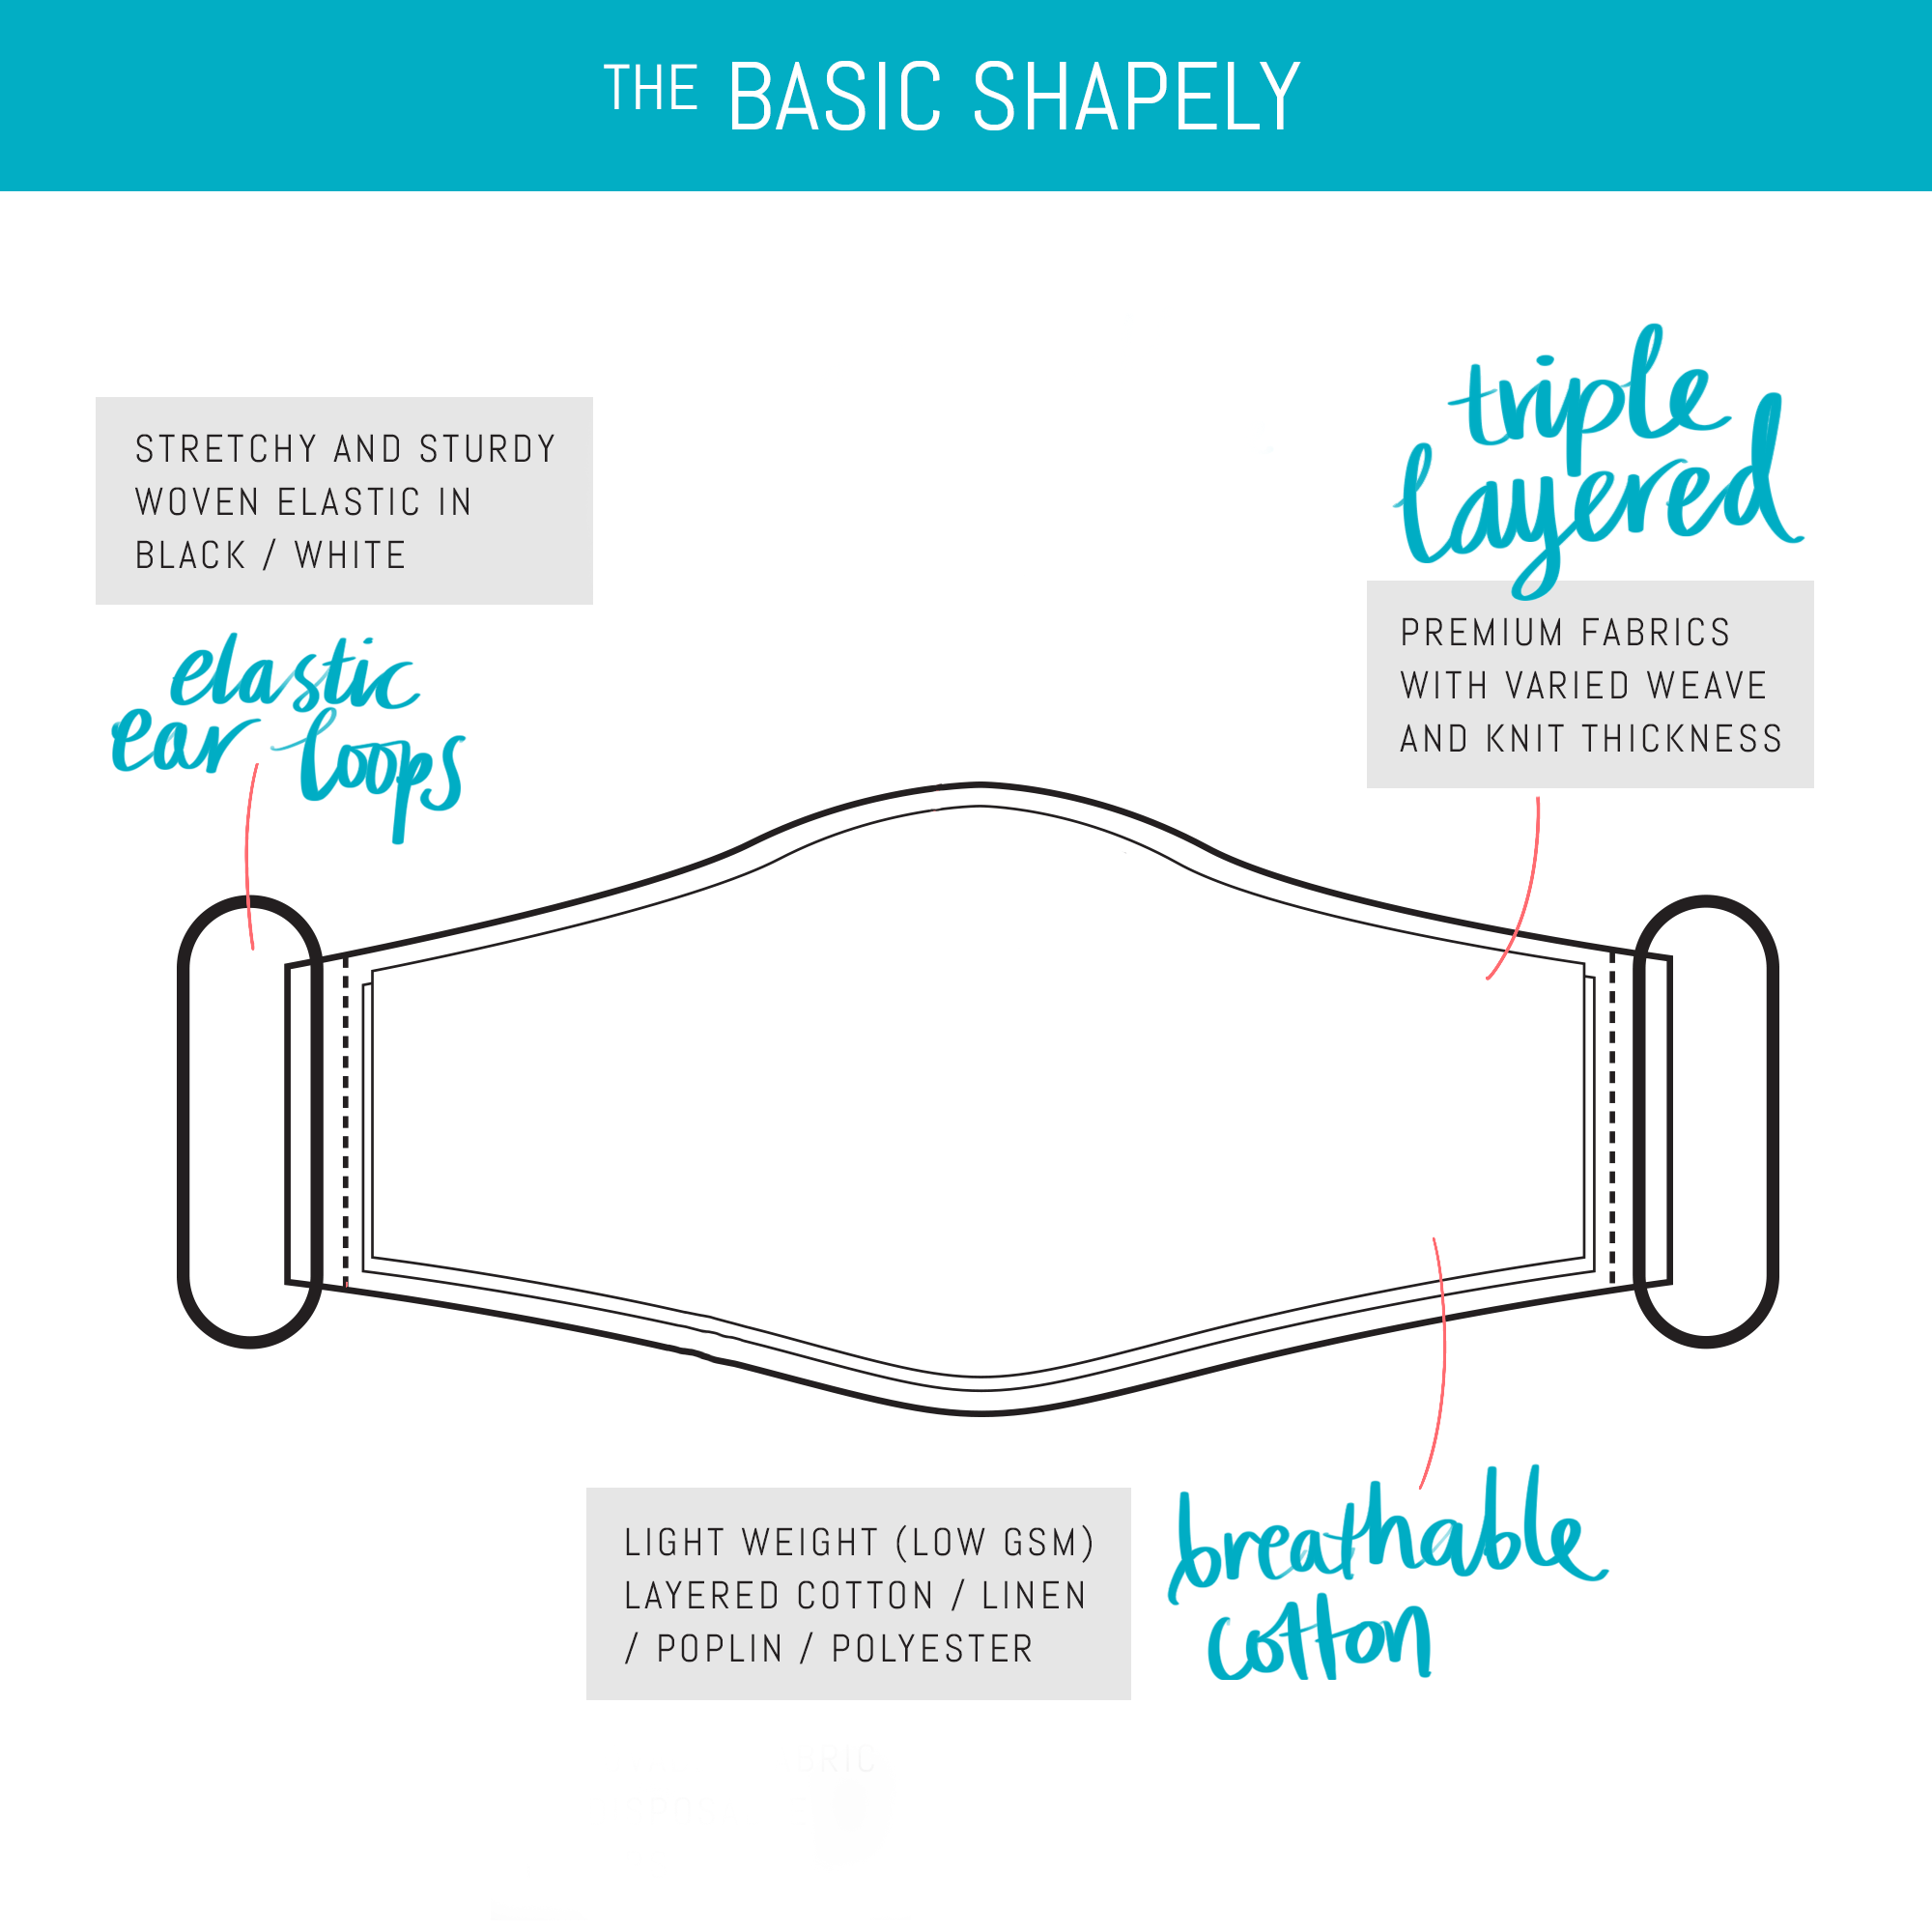 Basic Shapely face mask with three layers of fabric